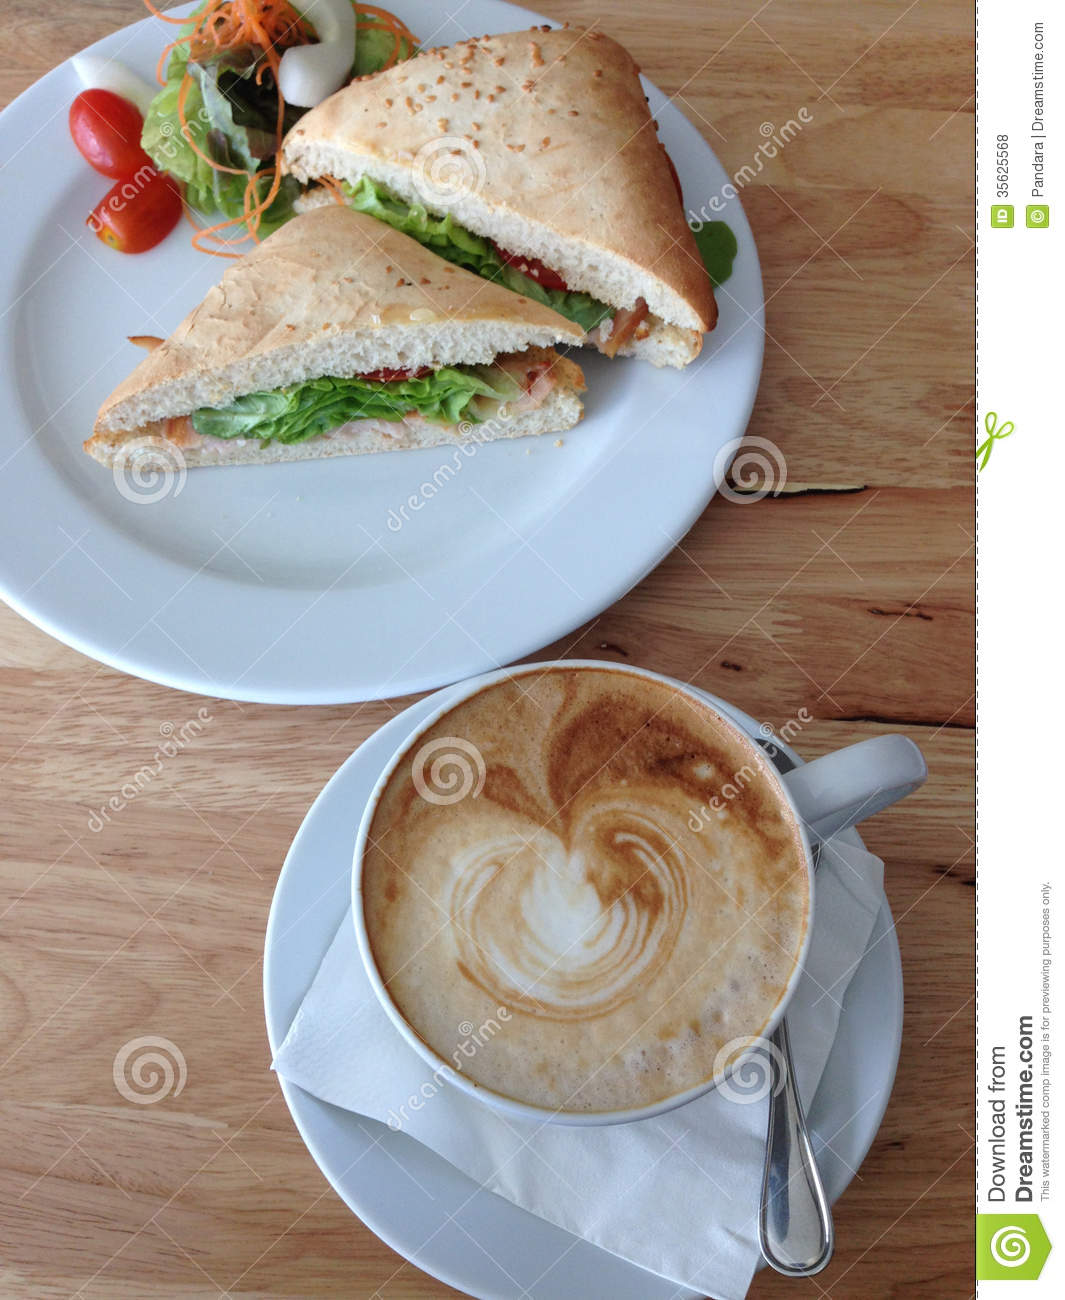 Tuna Sandwich And Latte Coffee Royalty Free Stock Photos   Image    